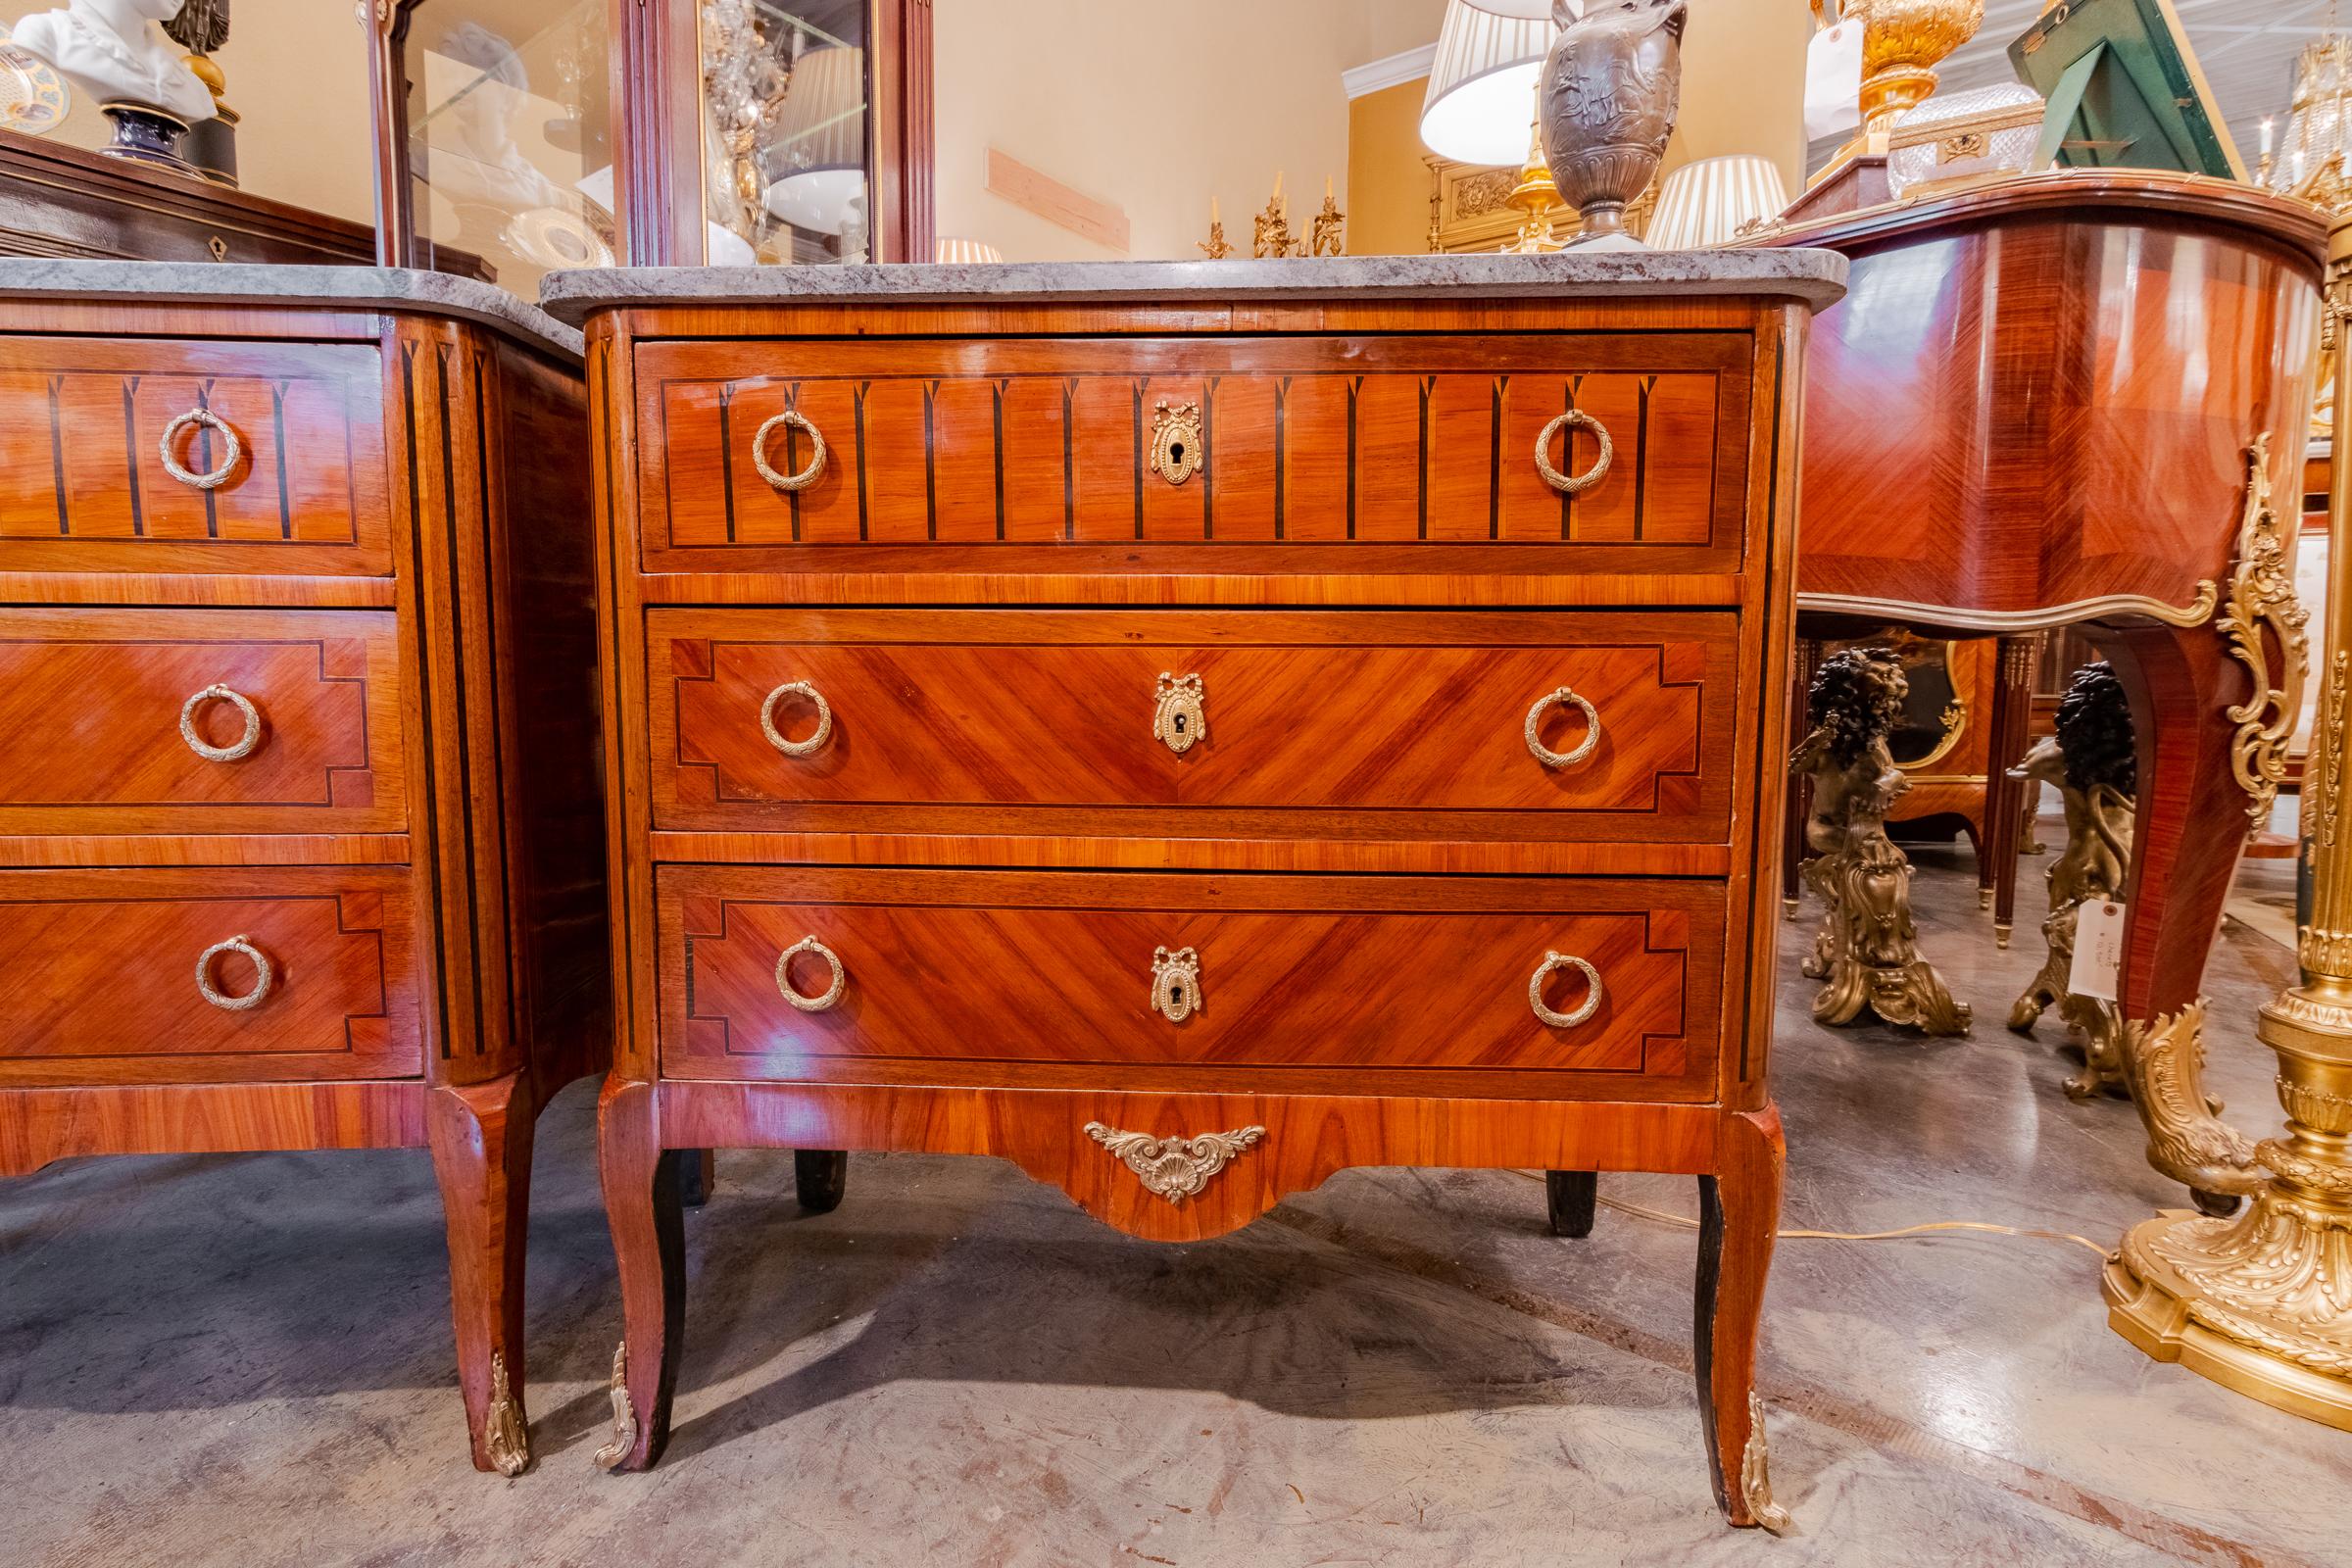 A fine pair of late 19th century Italian Louis XV mahogany and satinwood inlayed marble top nightstand commodes. Gilt bronze details.